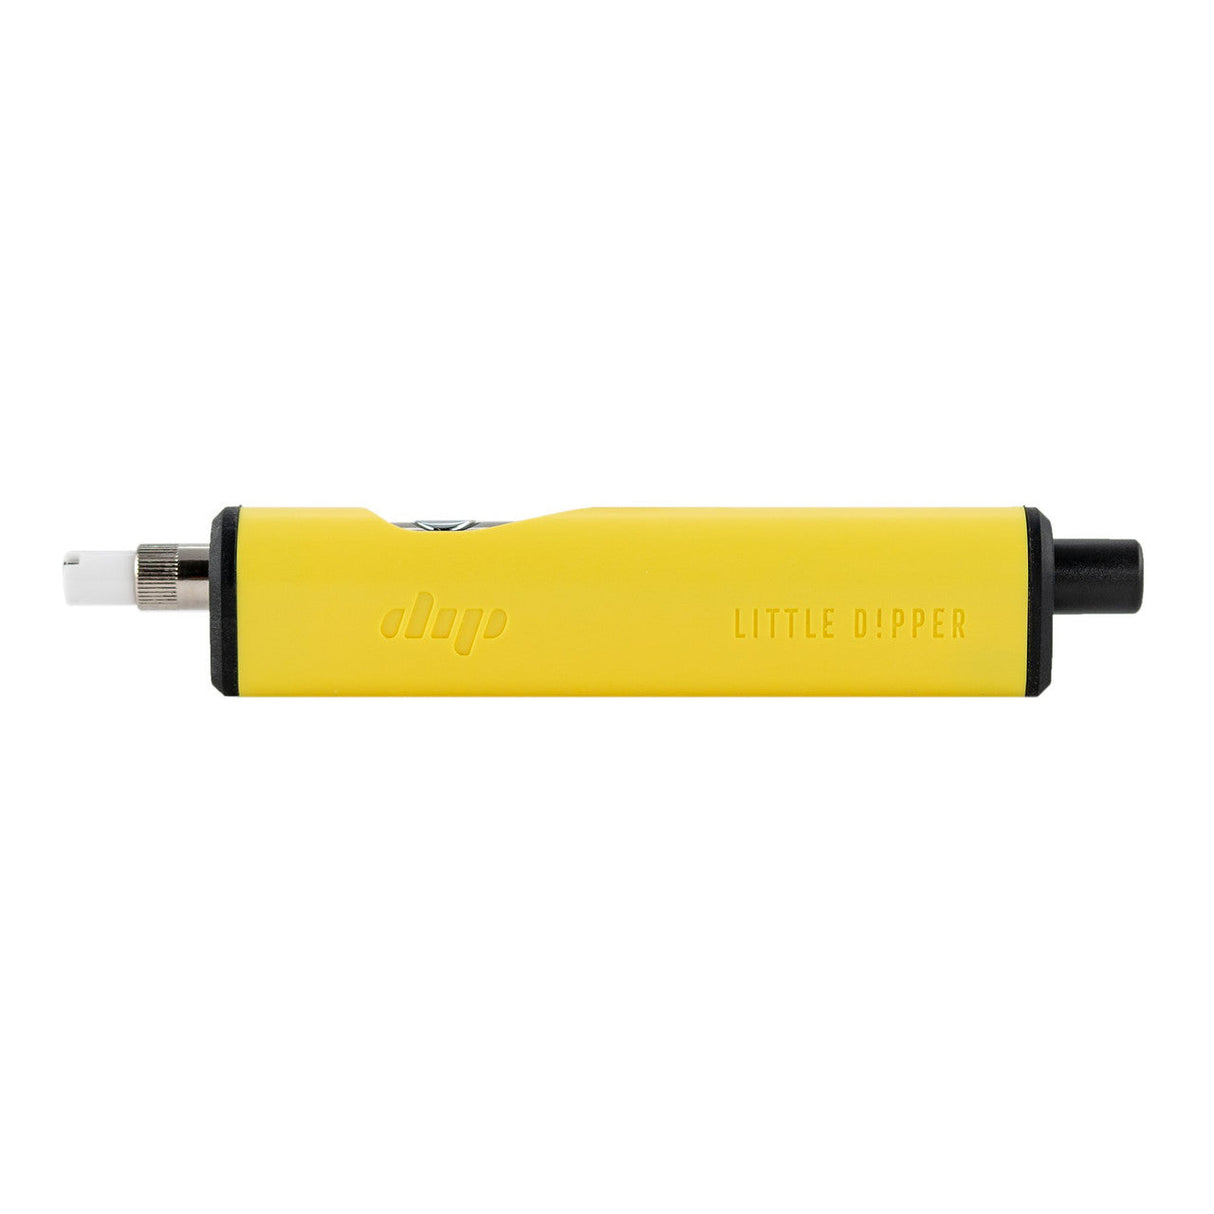 Dip Devices Little Dipper Vaporizer in Yellow - Battery-Powered for Concentrates